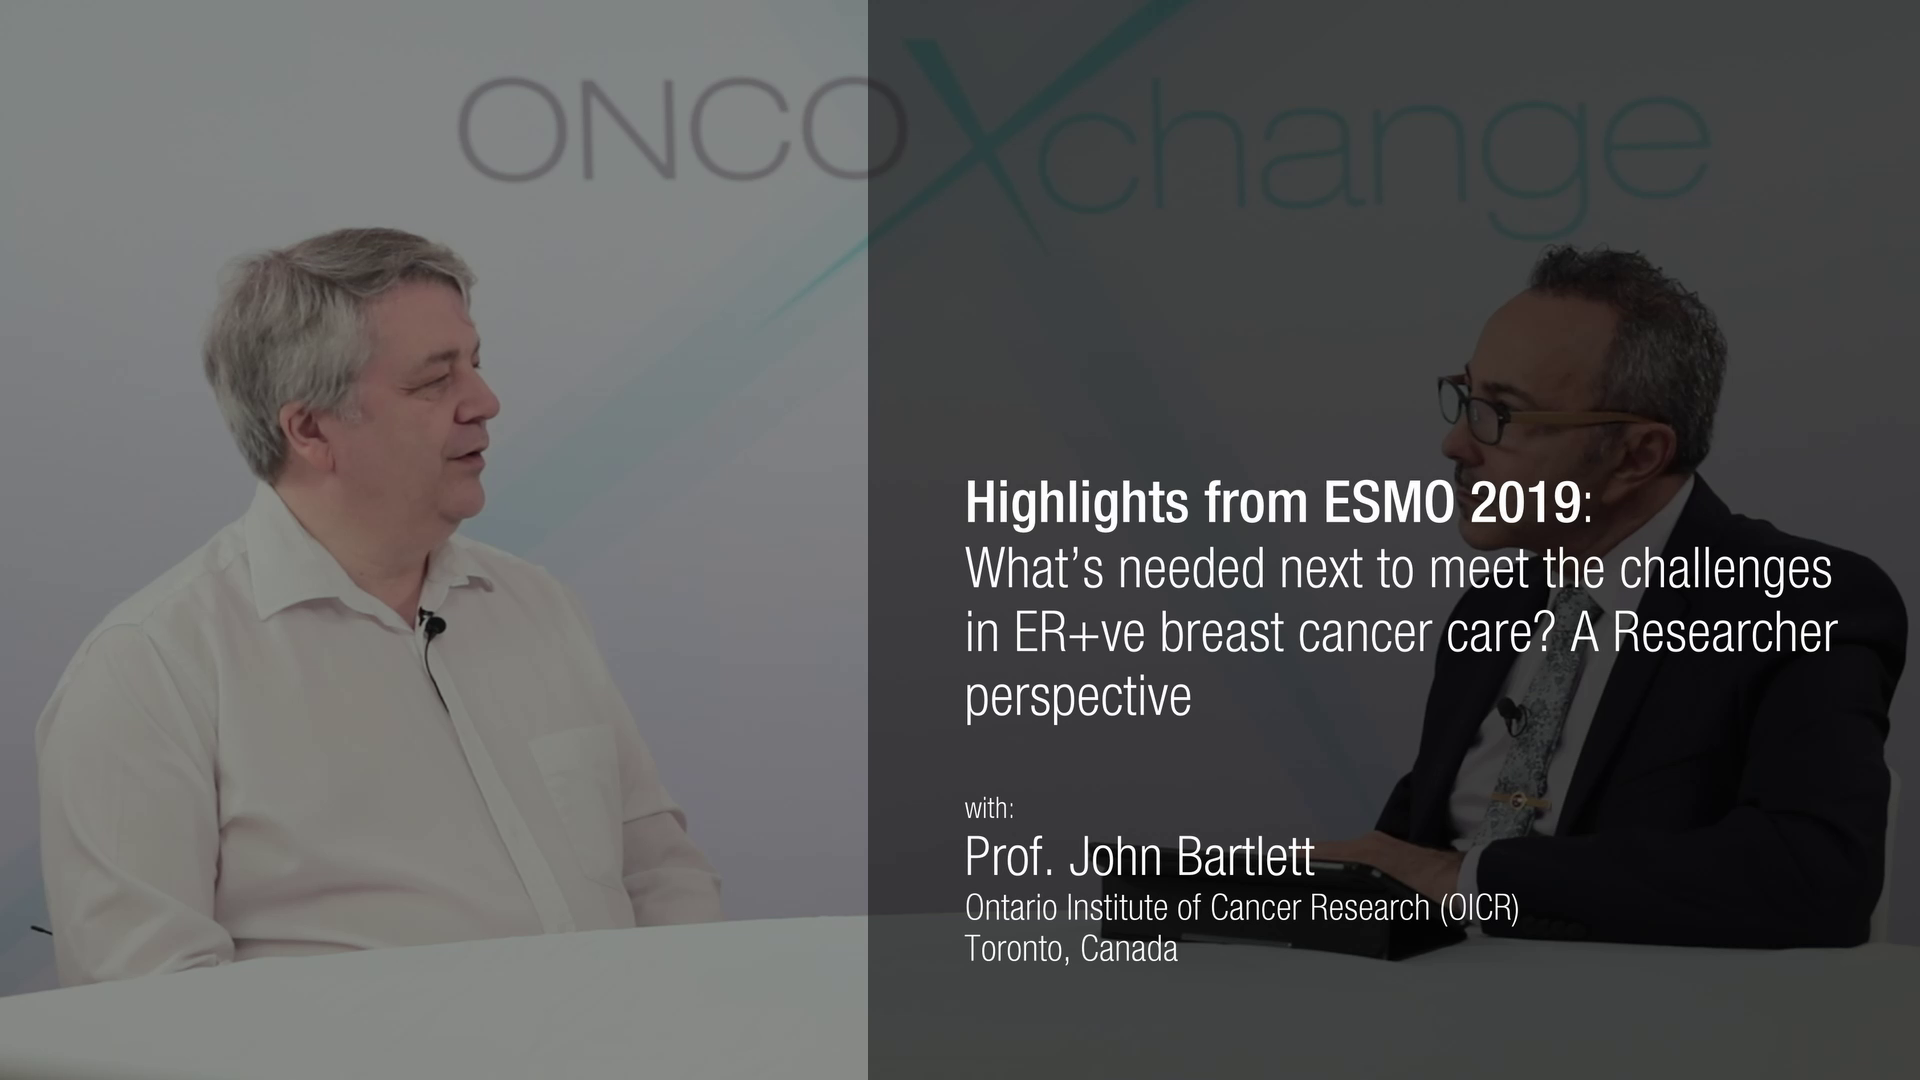 What’s needed next to meet the challenges in ER+ve breast cancer care?